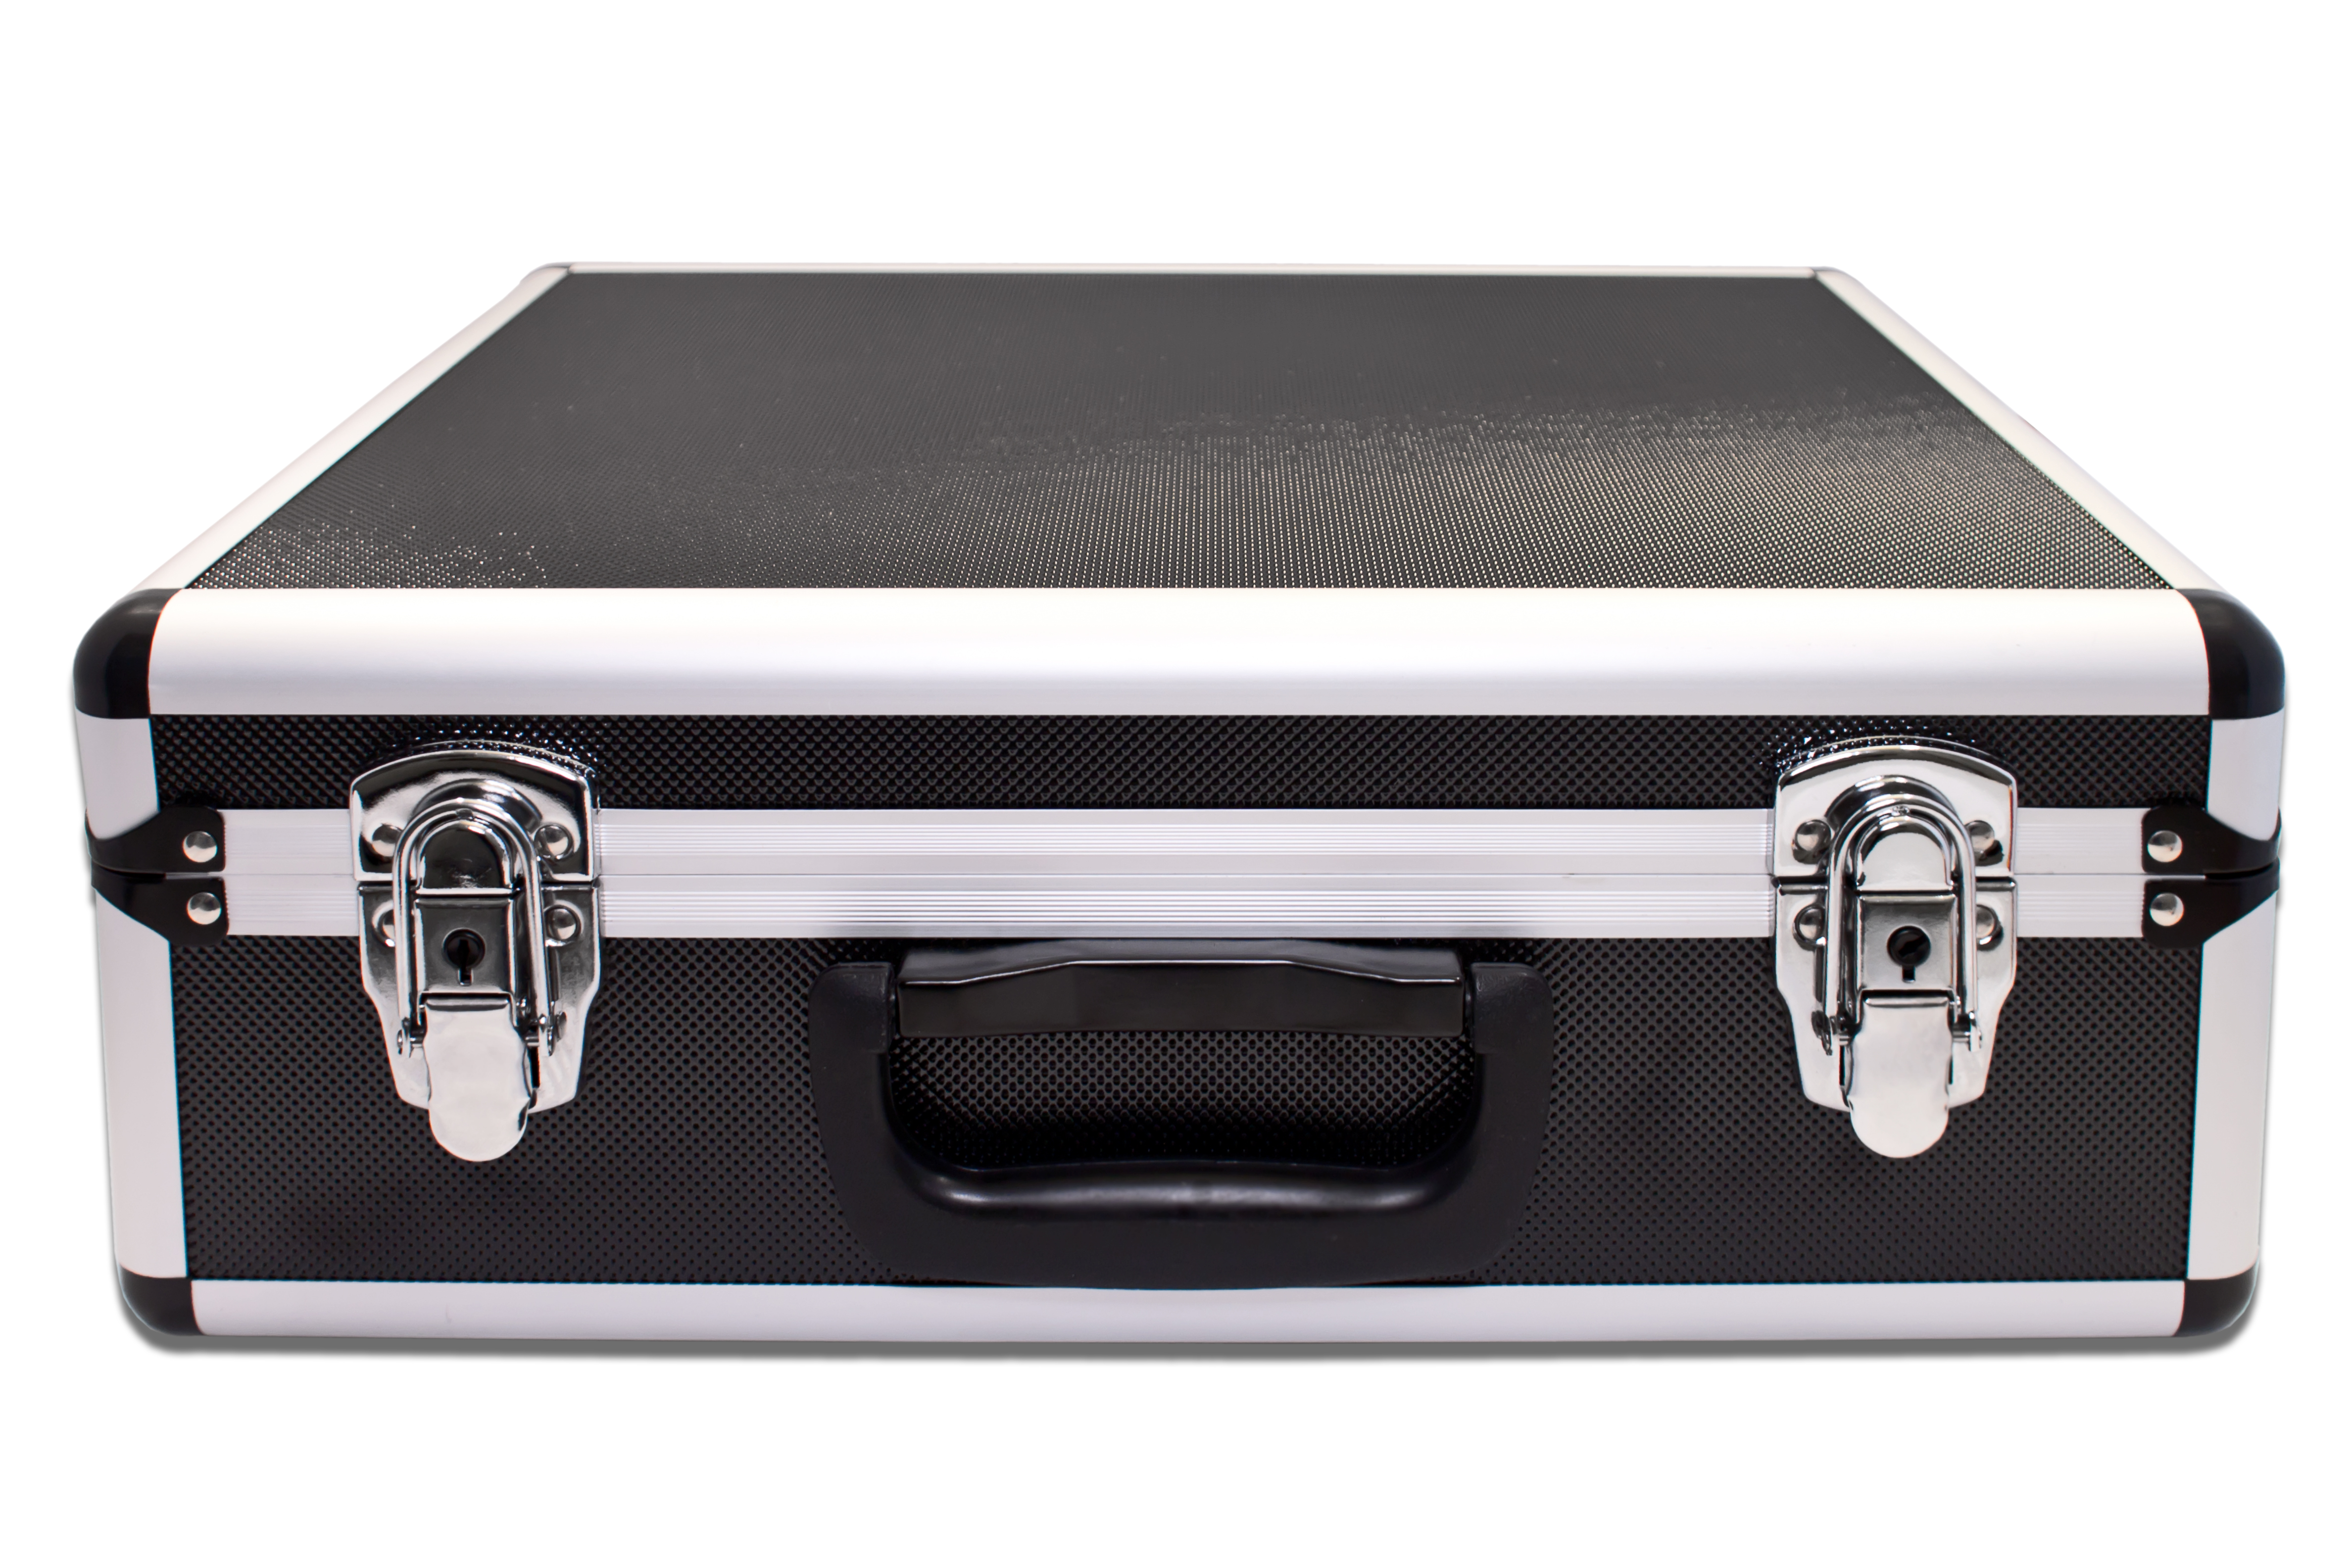 «PeakTech® P 7305» Carrying Case for Measurement Instruments